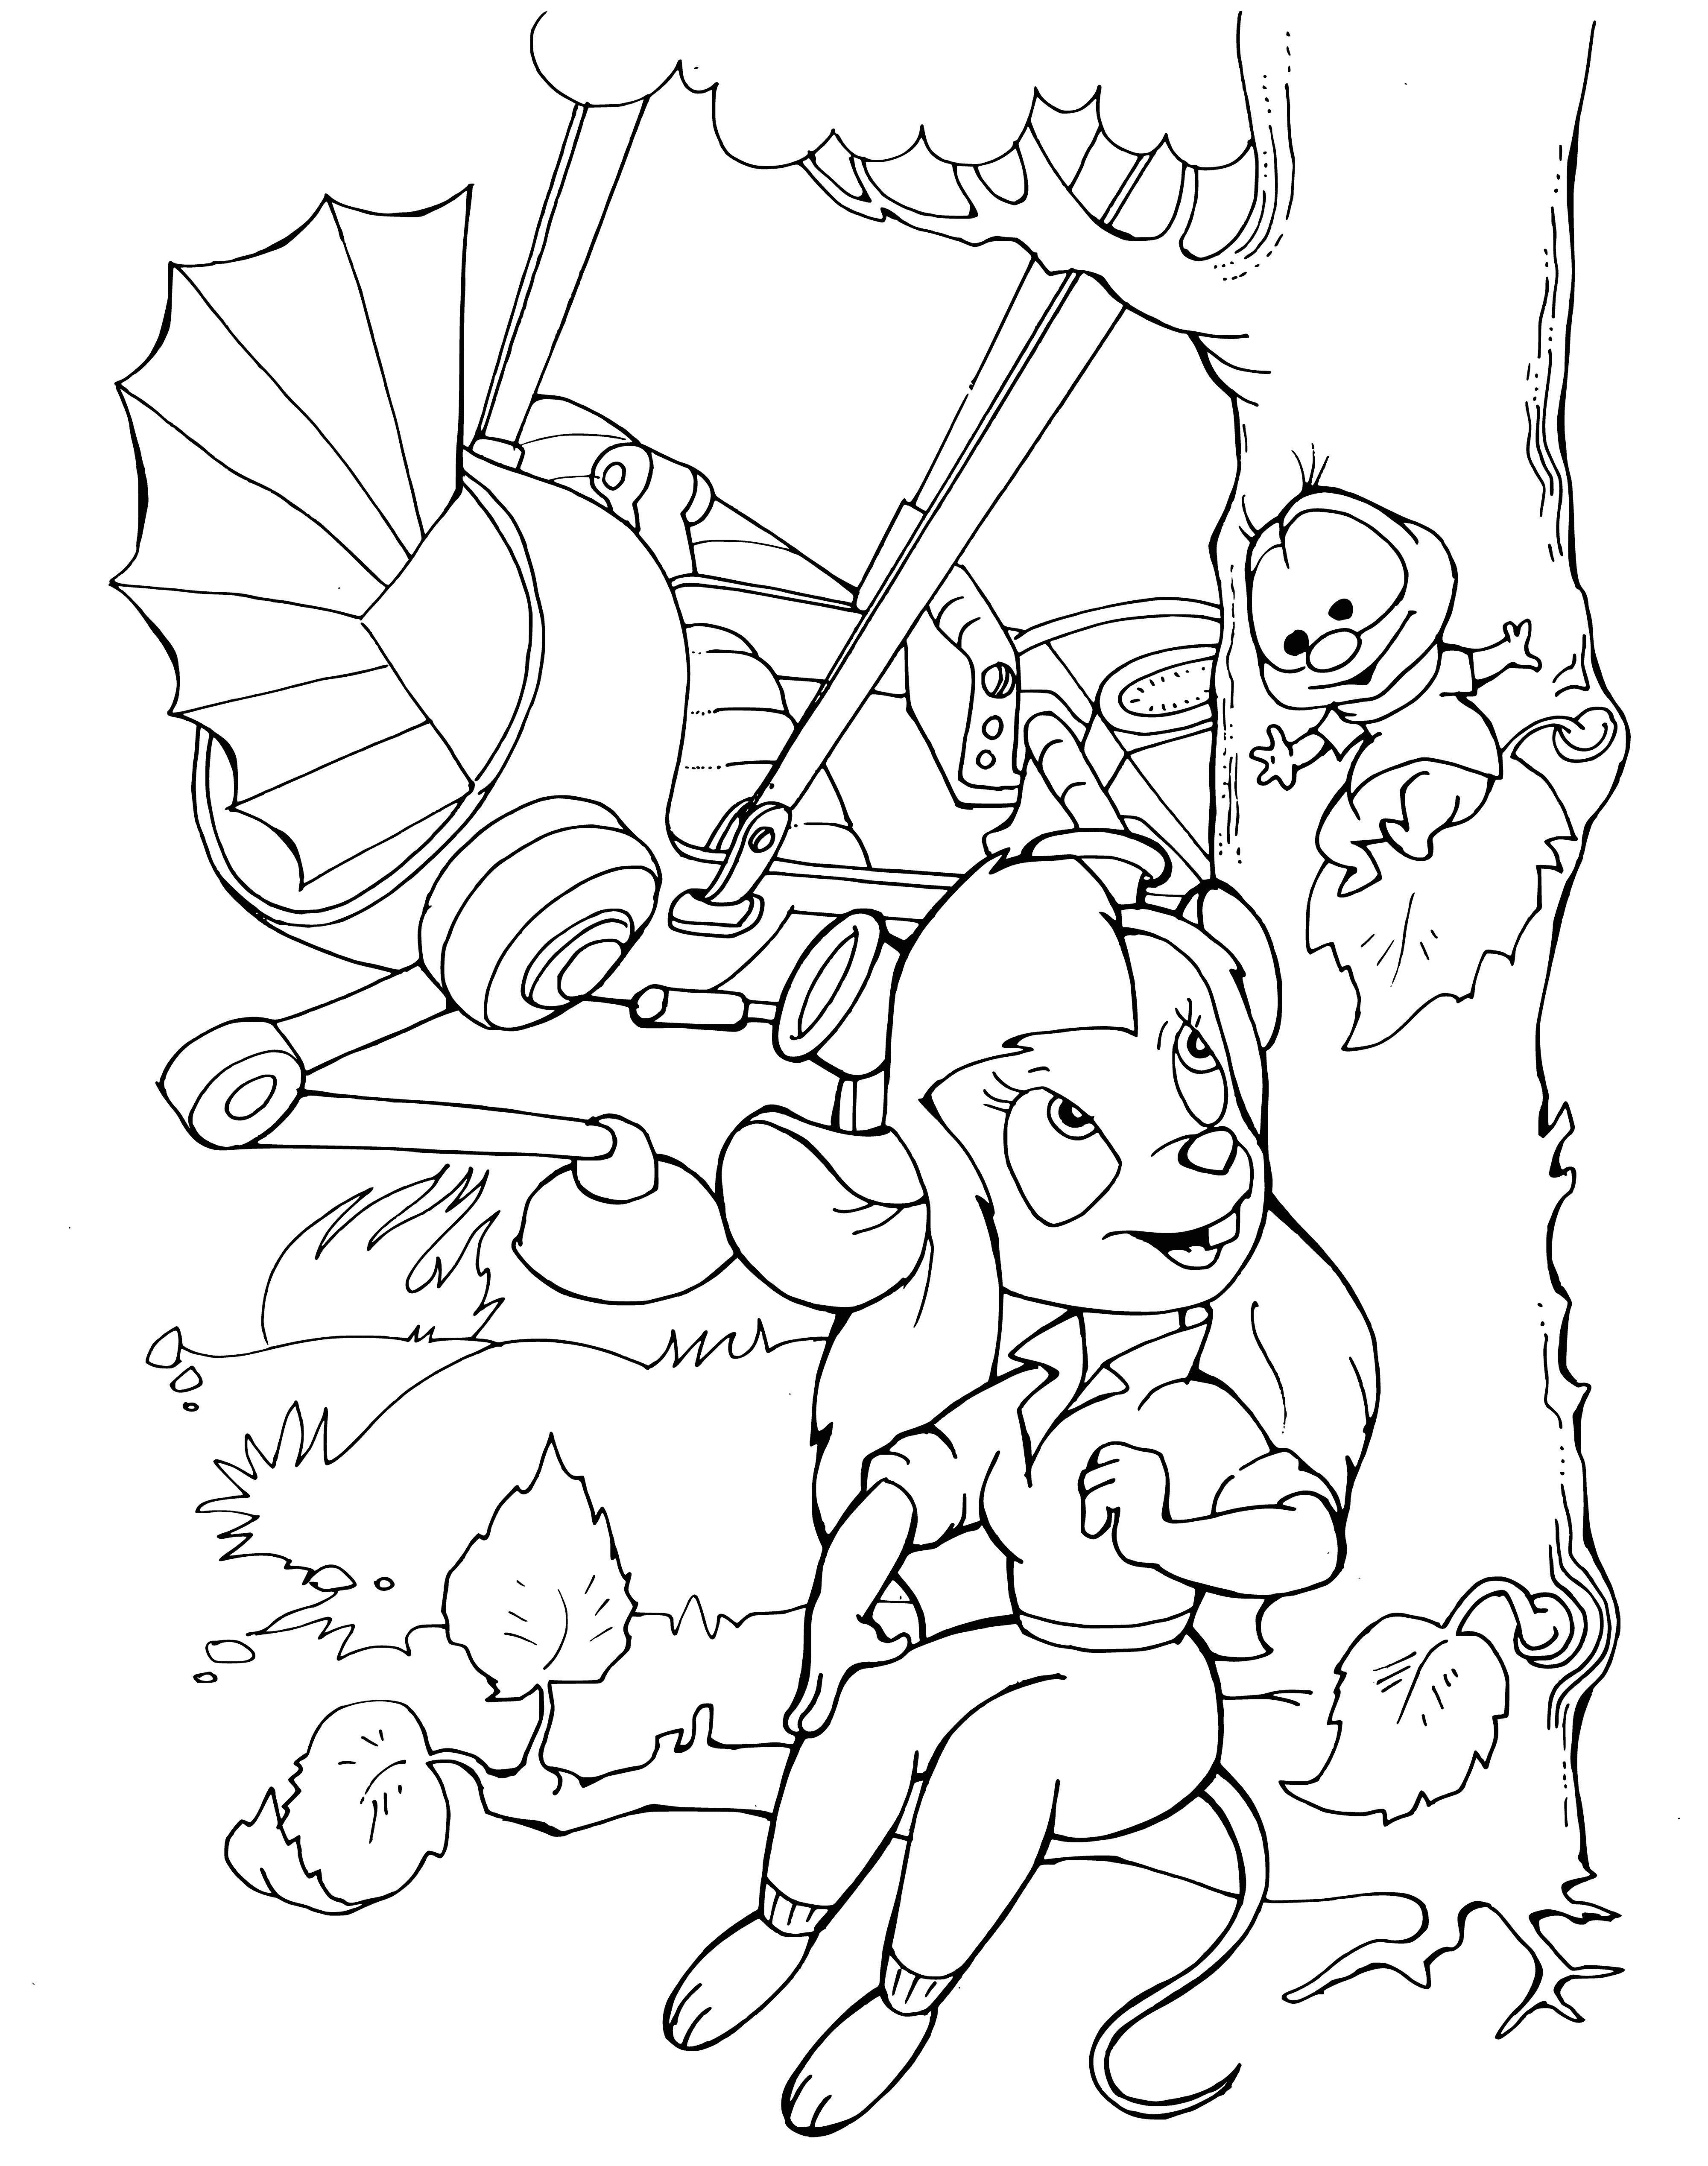 coloring page: Chipmunk pleads to woman with fire extinguisher while bird & mouse look on, concerned and annoyed.